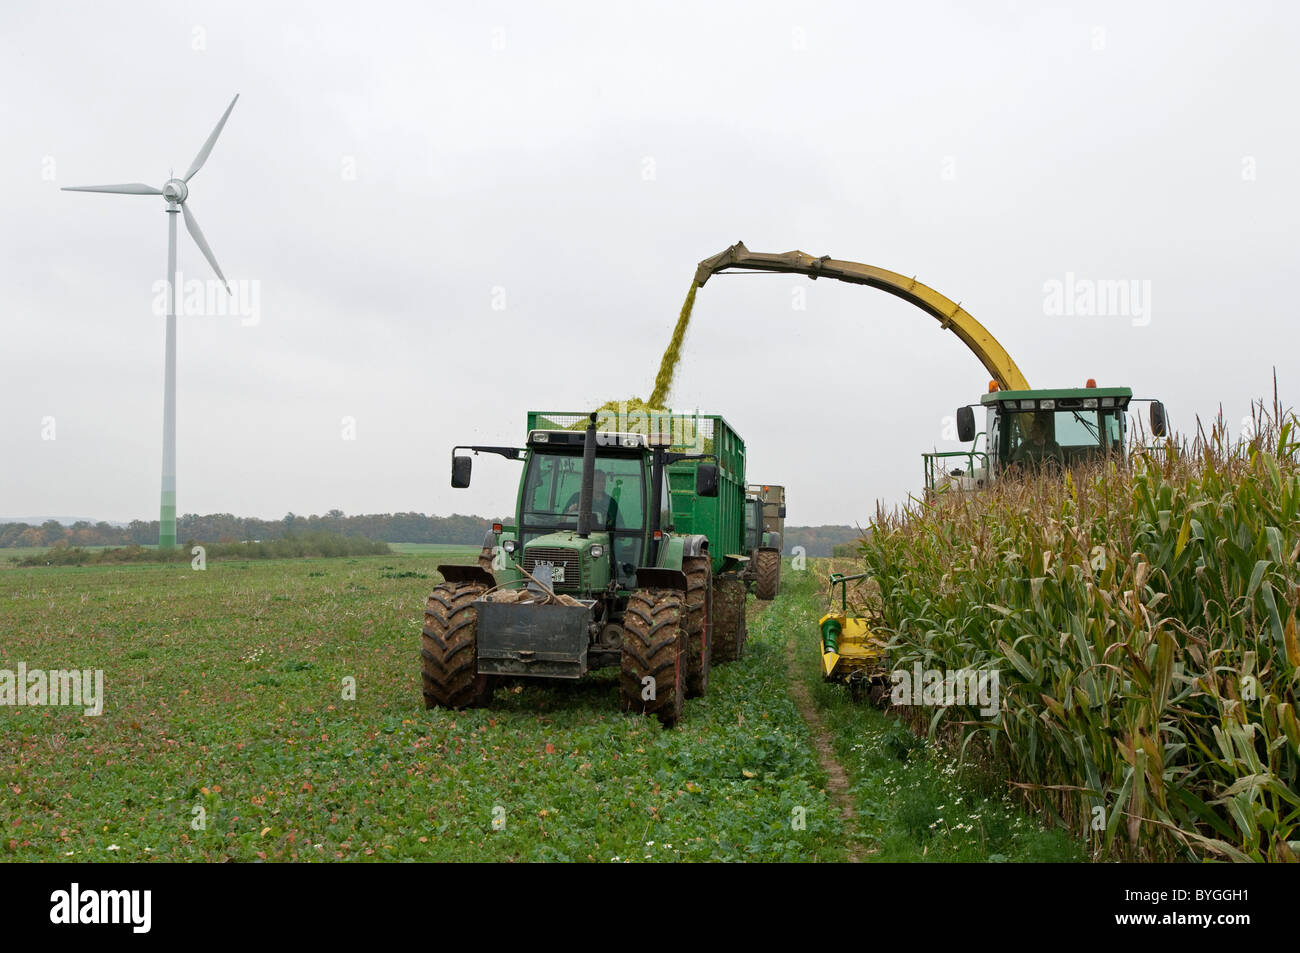 Maize, Corn (Zea mays). Harvest of maize. A tractor with a trailer running beside a self-propelled forage harvester. Stock Photo